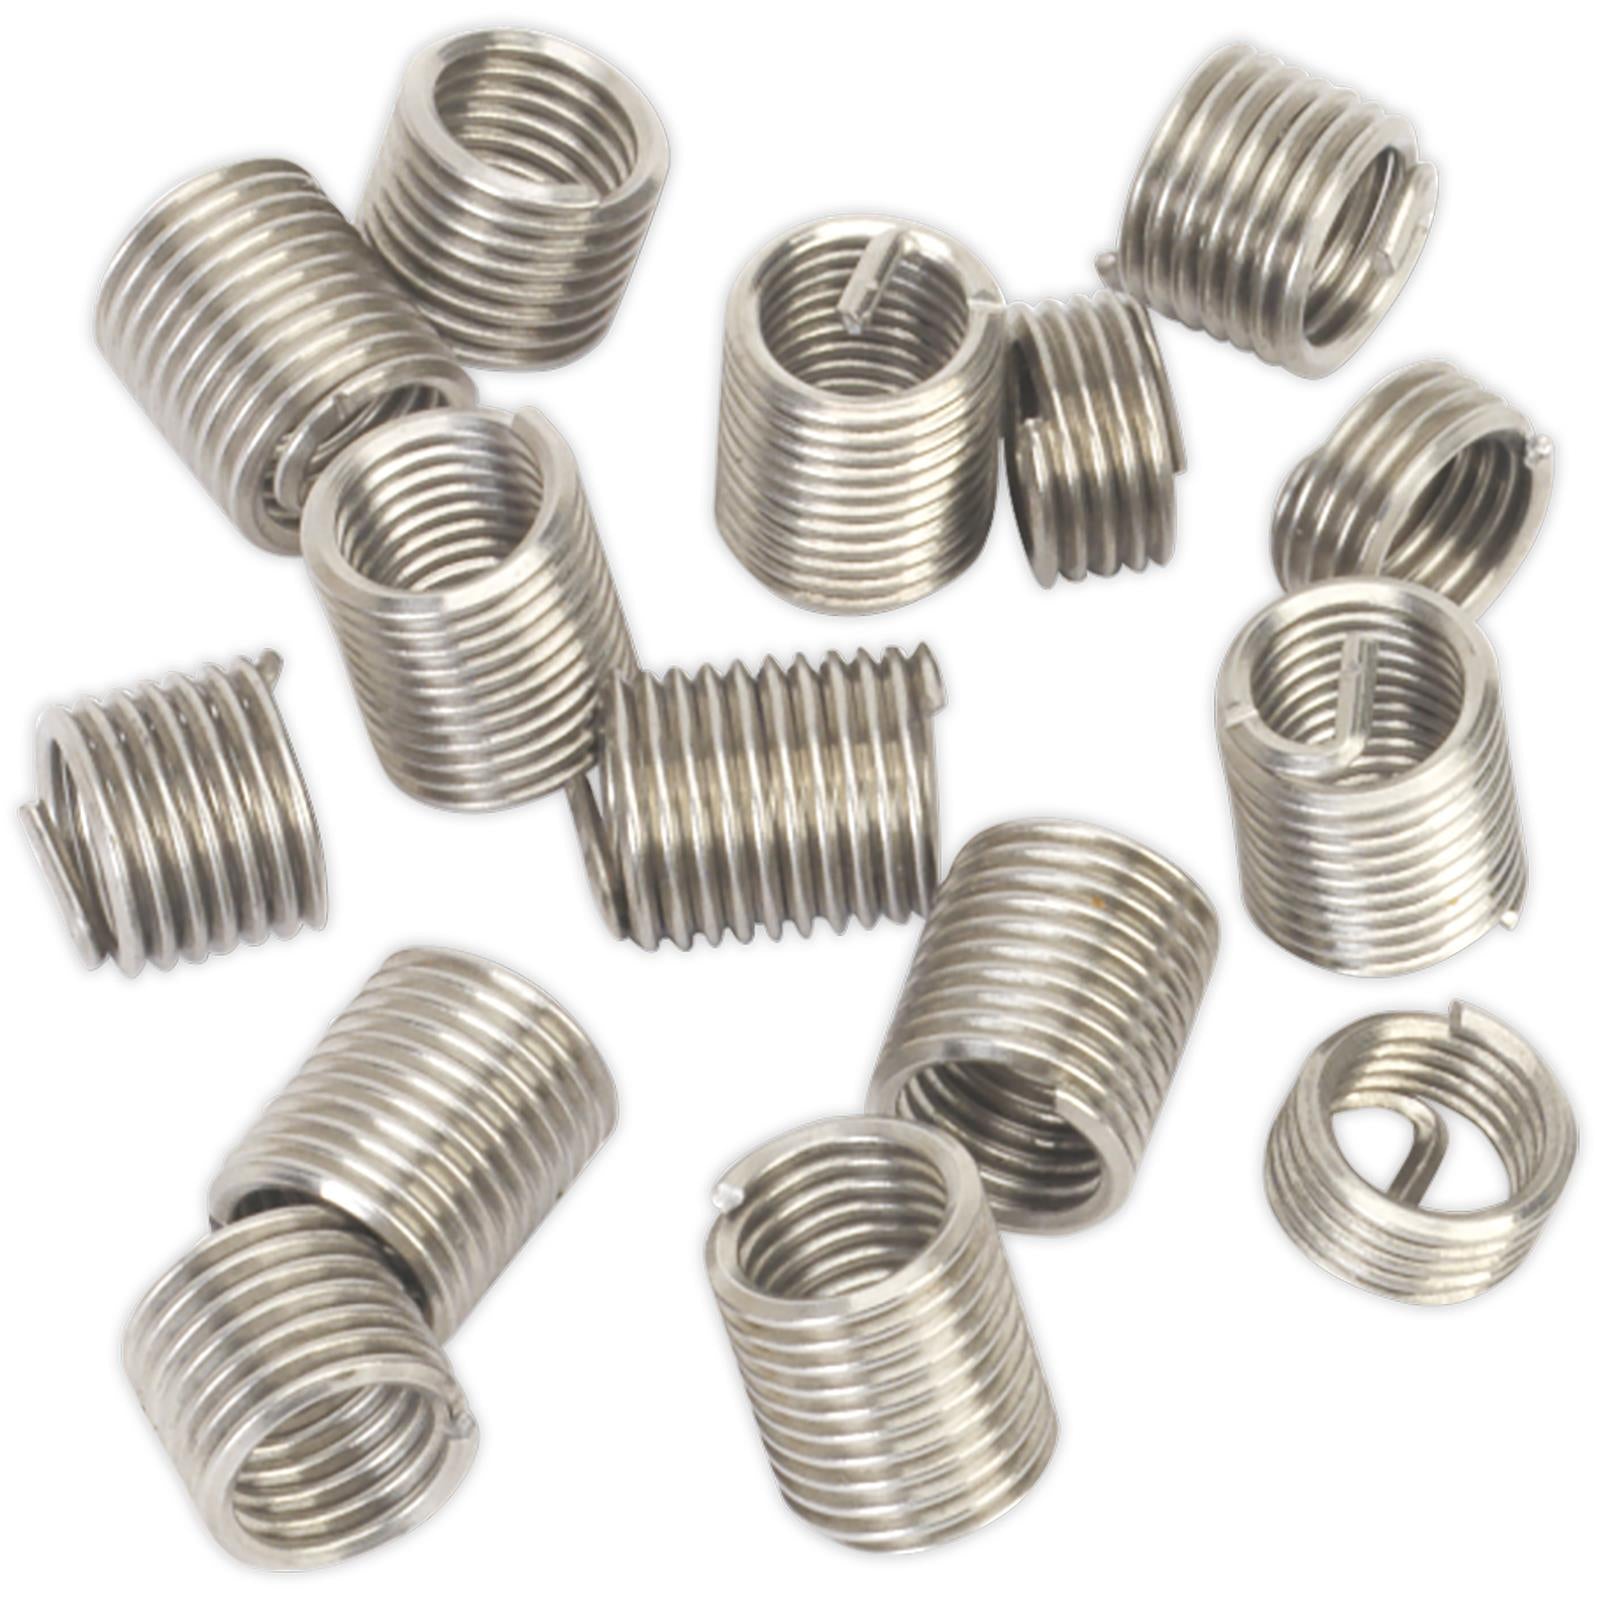 Sealey Thread Insert M10 x 1.5mm for TRM10 Threaded Inserts Helicoil 10 Pack